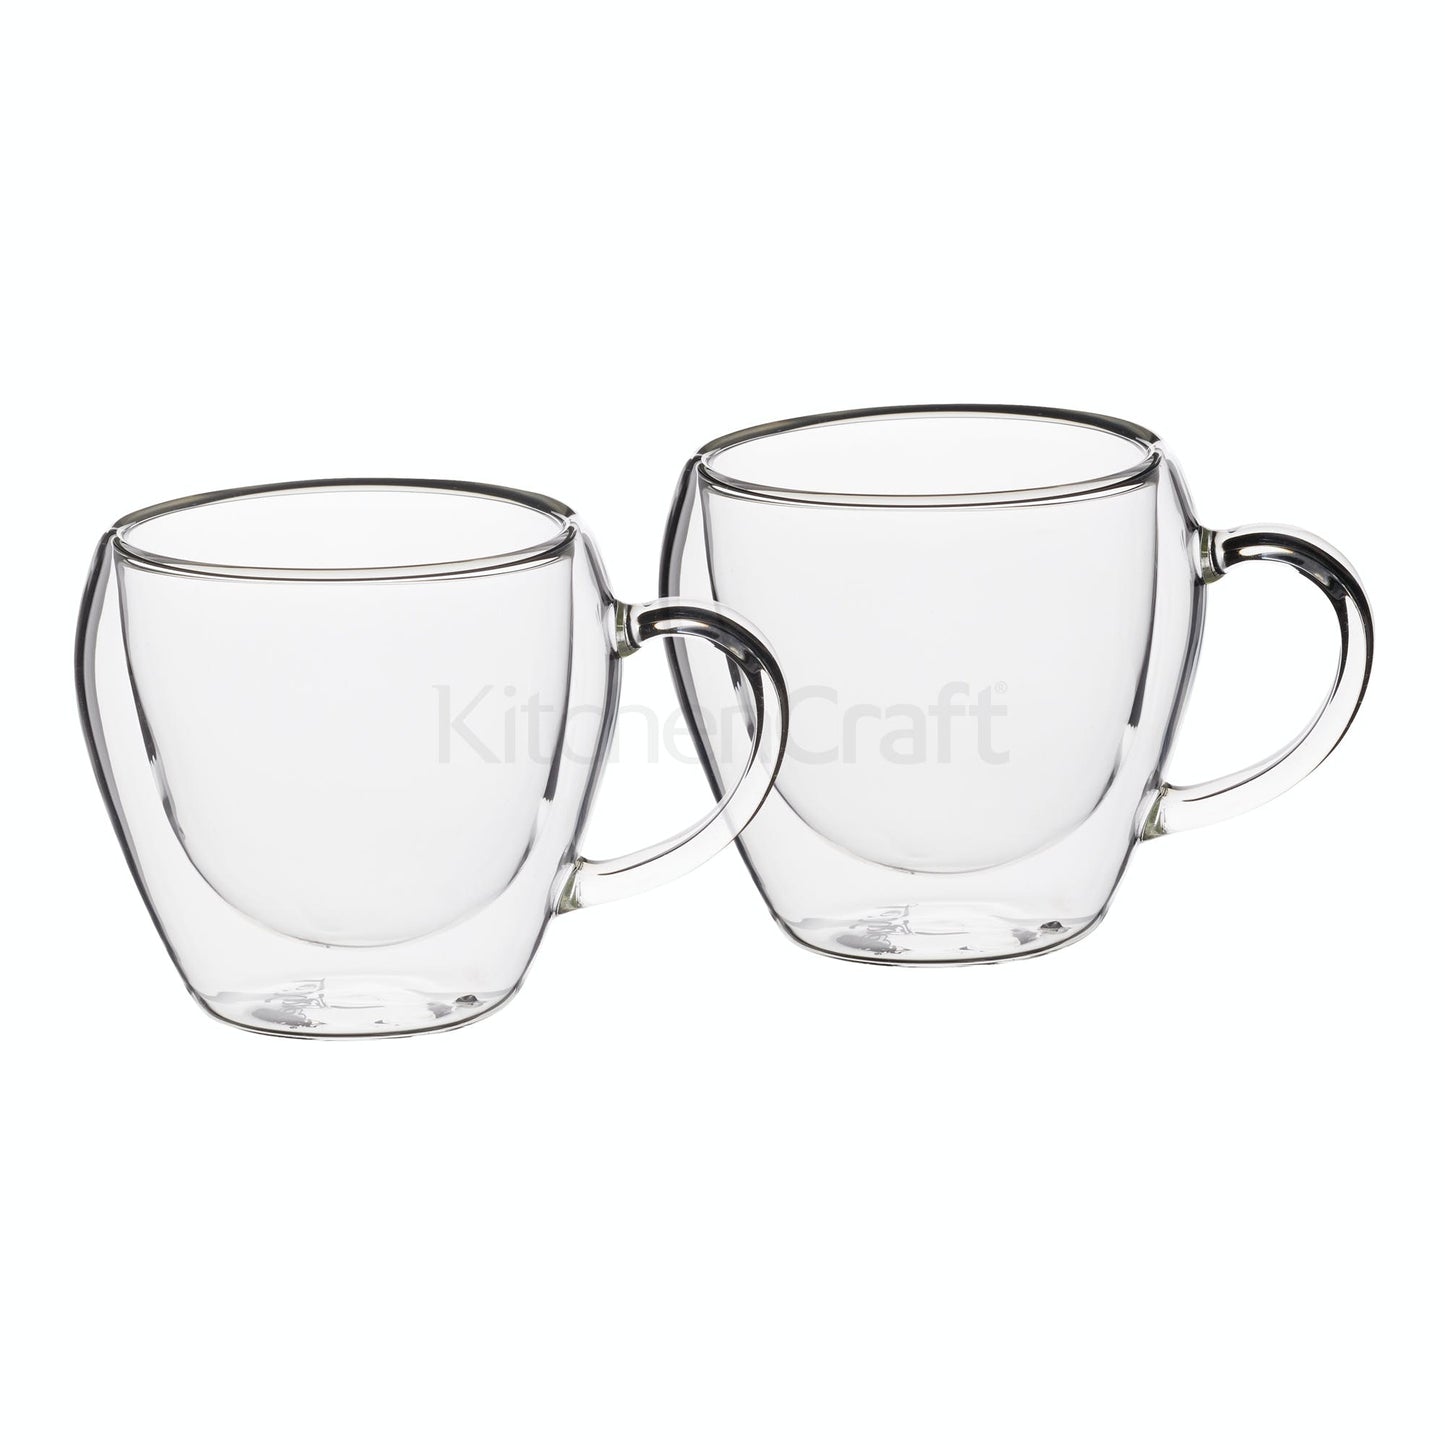 KitchenCraft LeXpress Double Walled Glass Tea Cups KCLXDWTCUP2PC